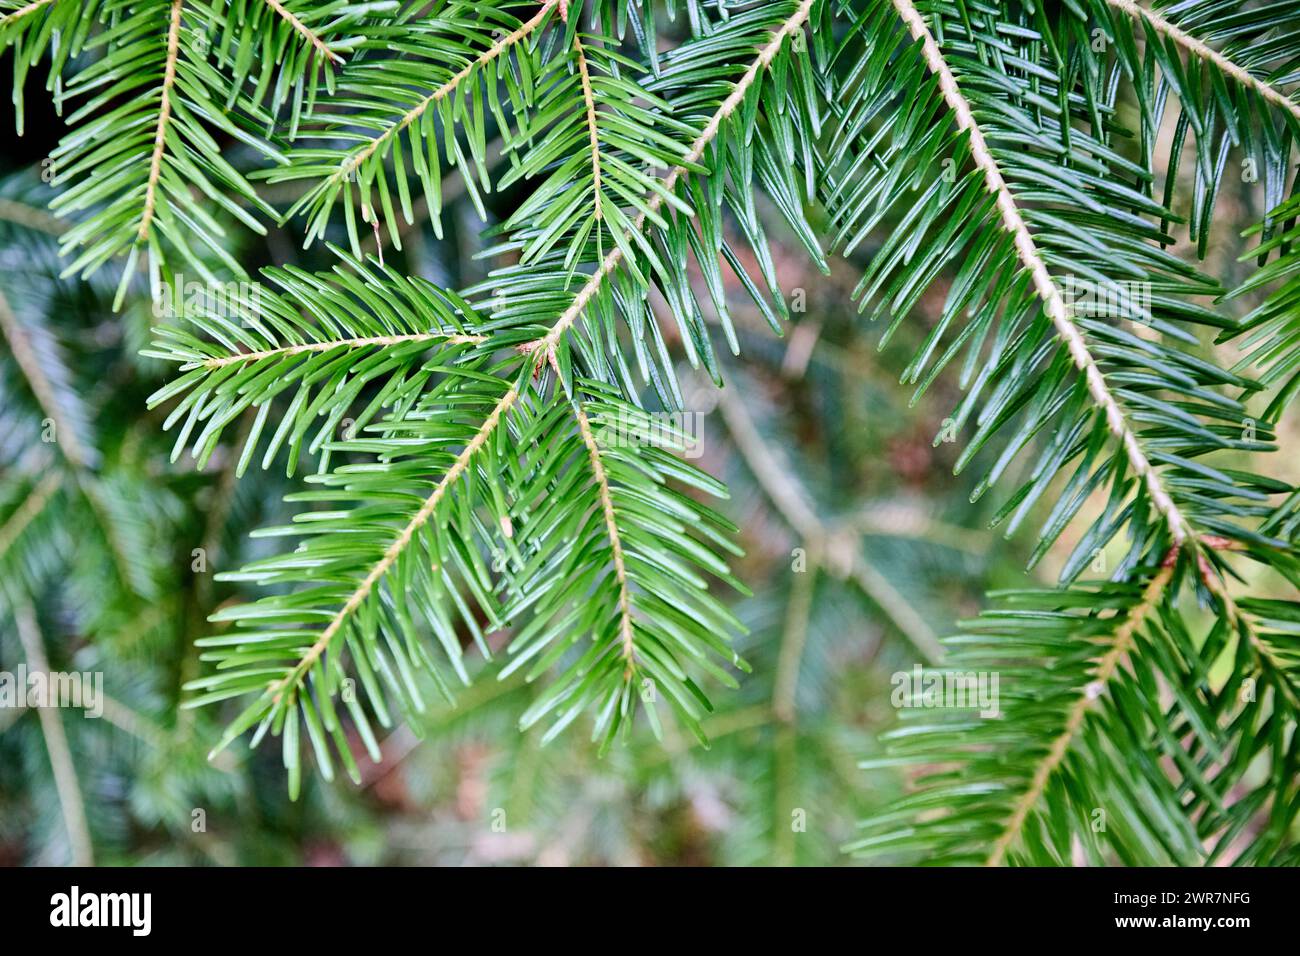 Abies veitchii Veitch's fir Veitch's silver-fir sikokiana coniferous evergreen tree branches. Natural floral background of young fir tree branches. Stock Photo